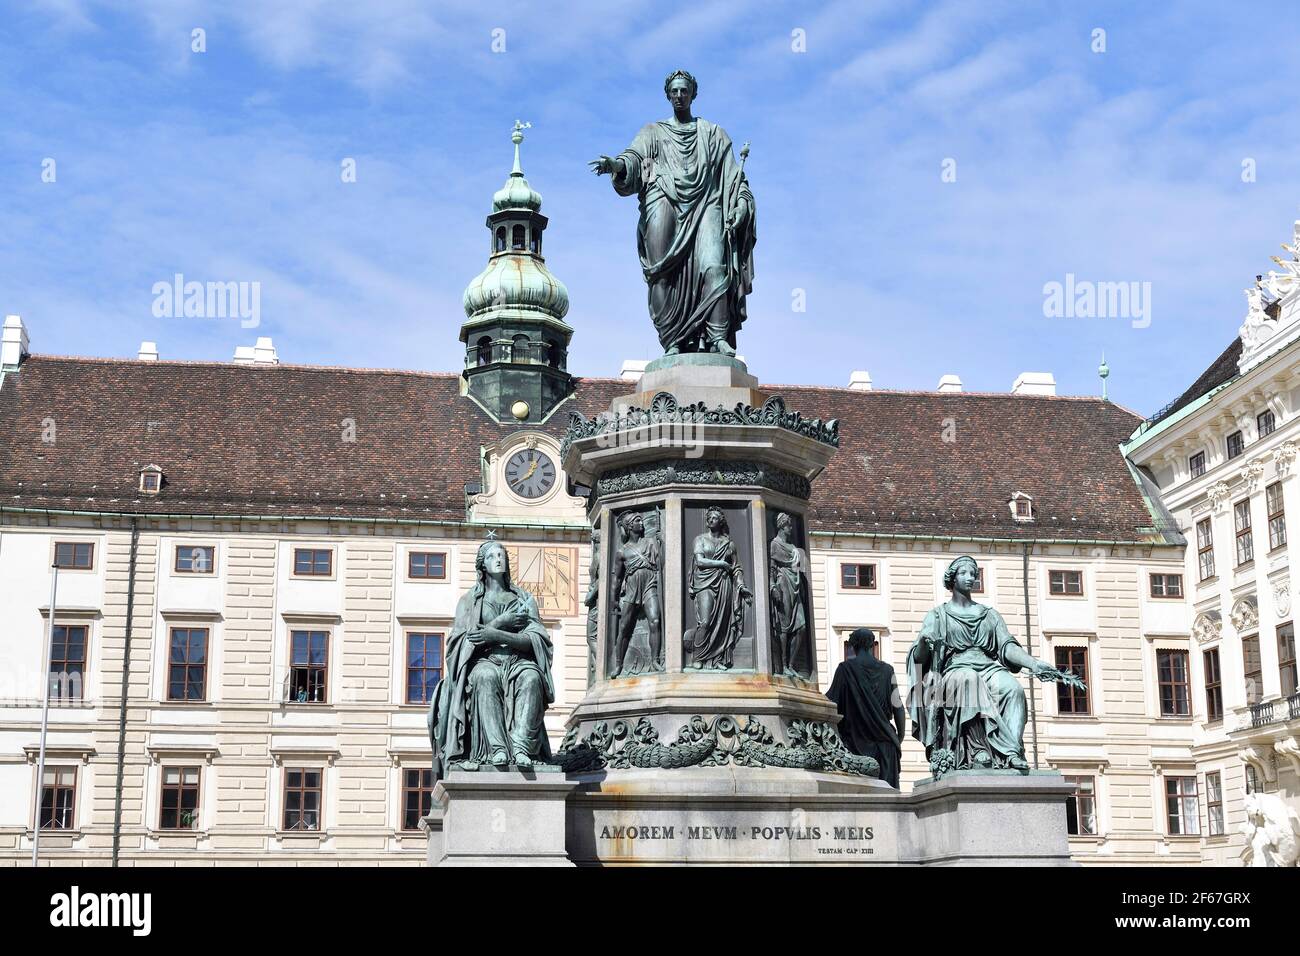 Vienna, Austria. In the castle (Hofburg) with the monumental monument to Emperor Franz I in the center Stock Photo